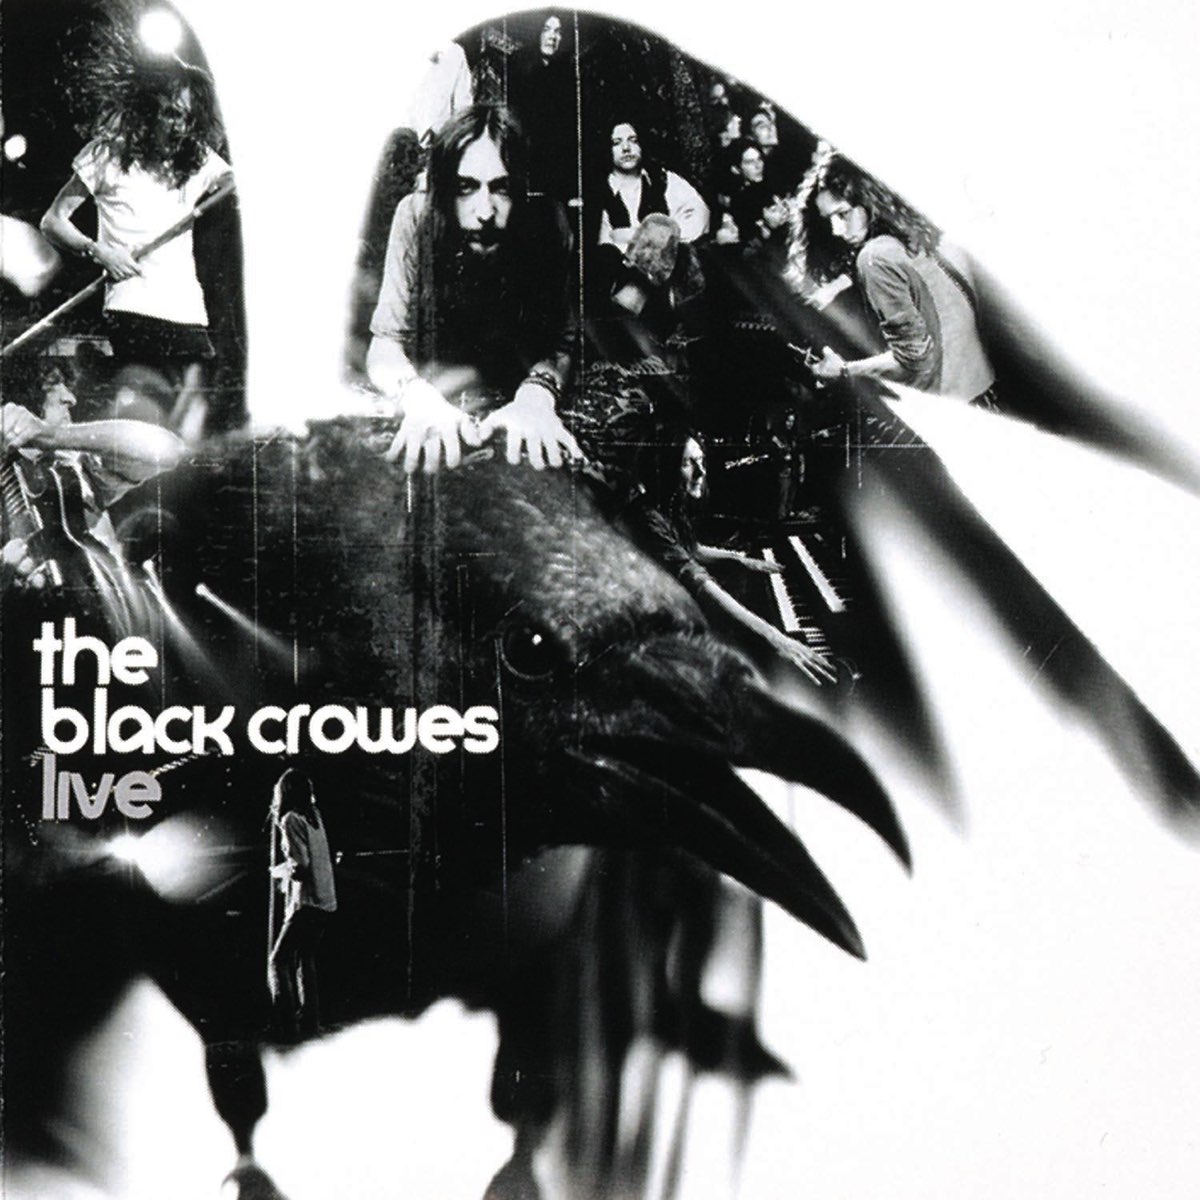 ‎the Black Crowes Live By The Black Crowes On Apple Music